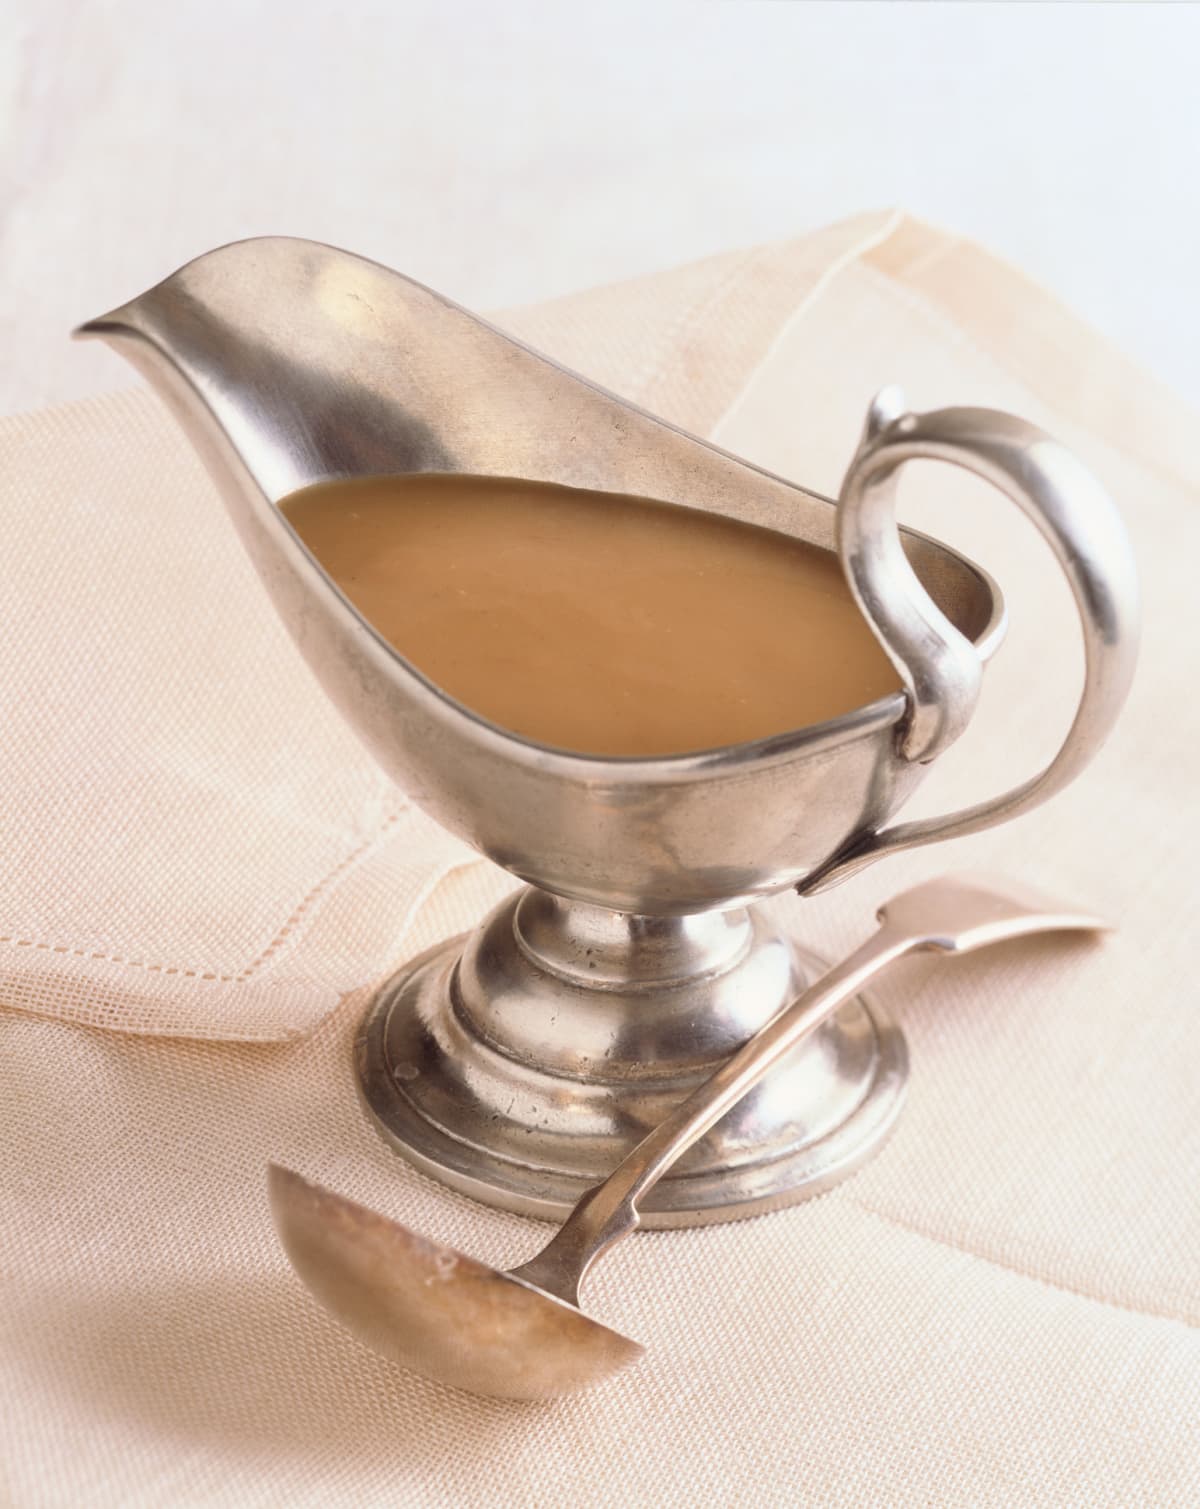 Gravy boat on cloth with a ladle